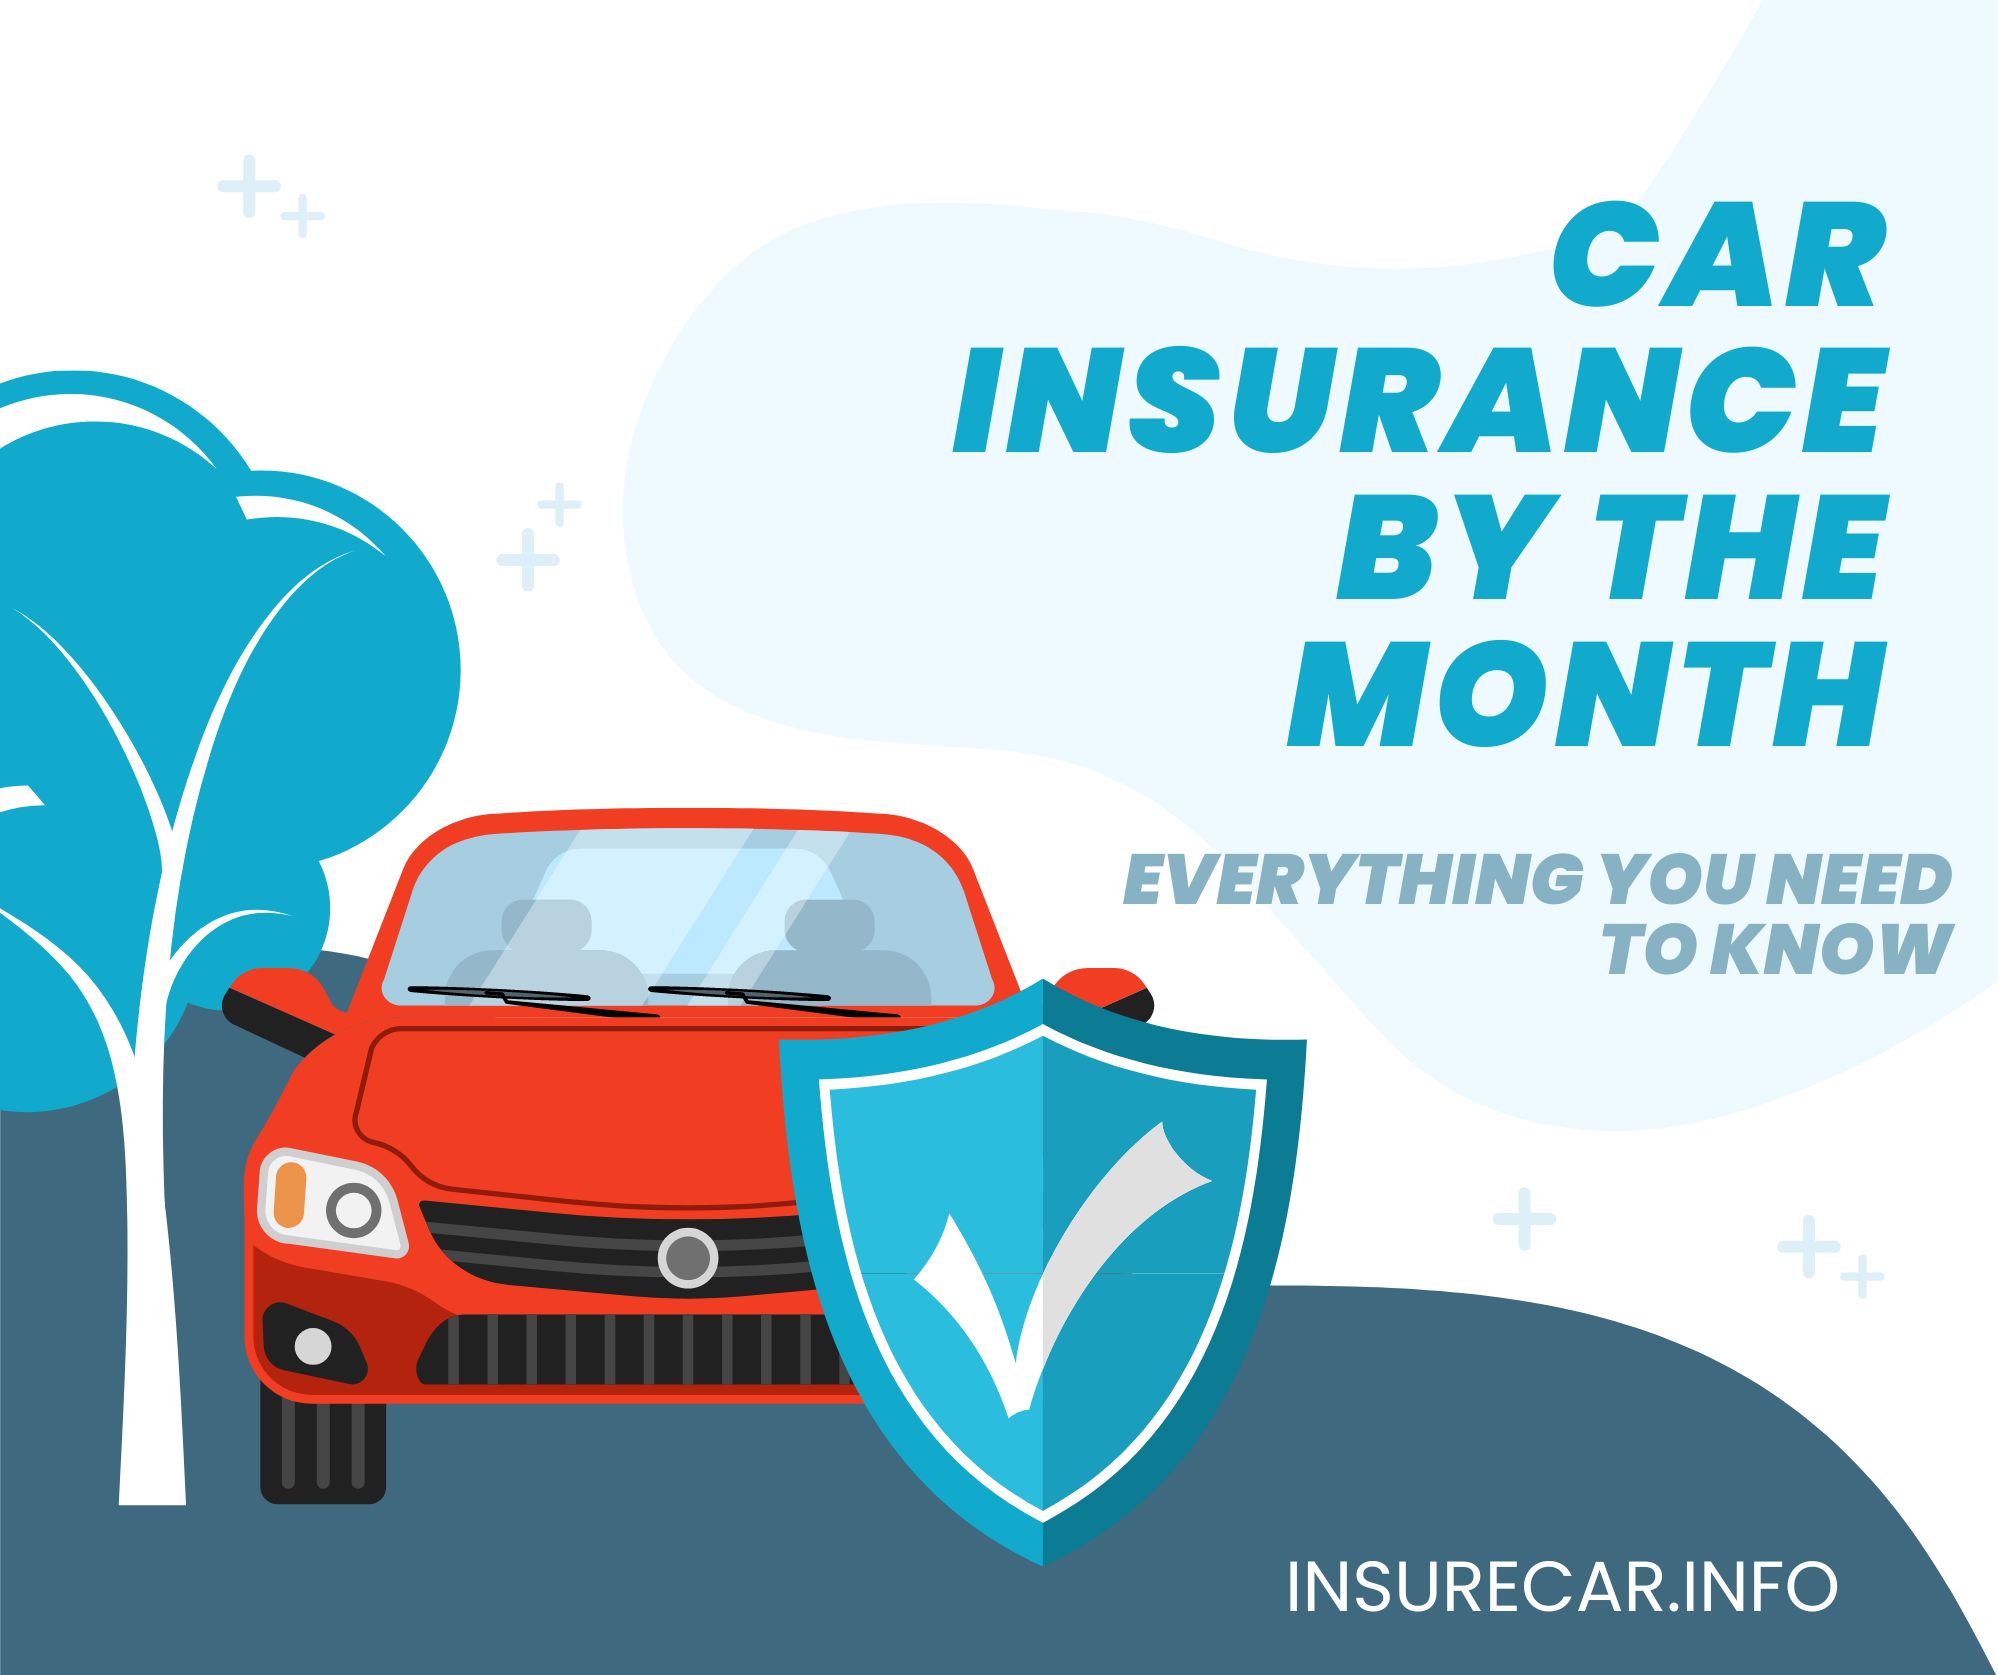 Car Insurance by the Month: Everything You Need to Know